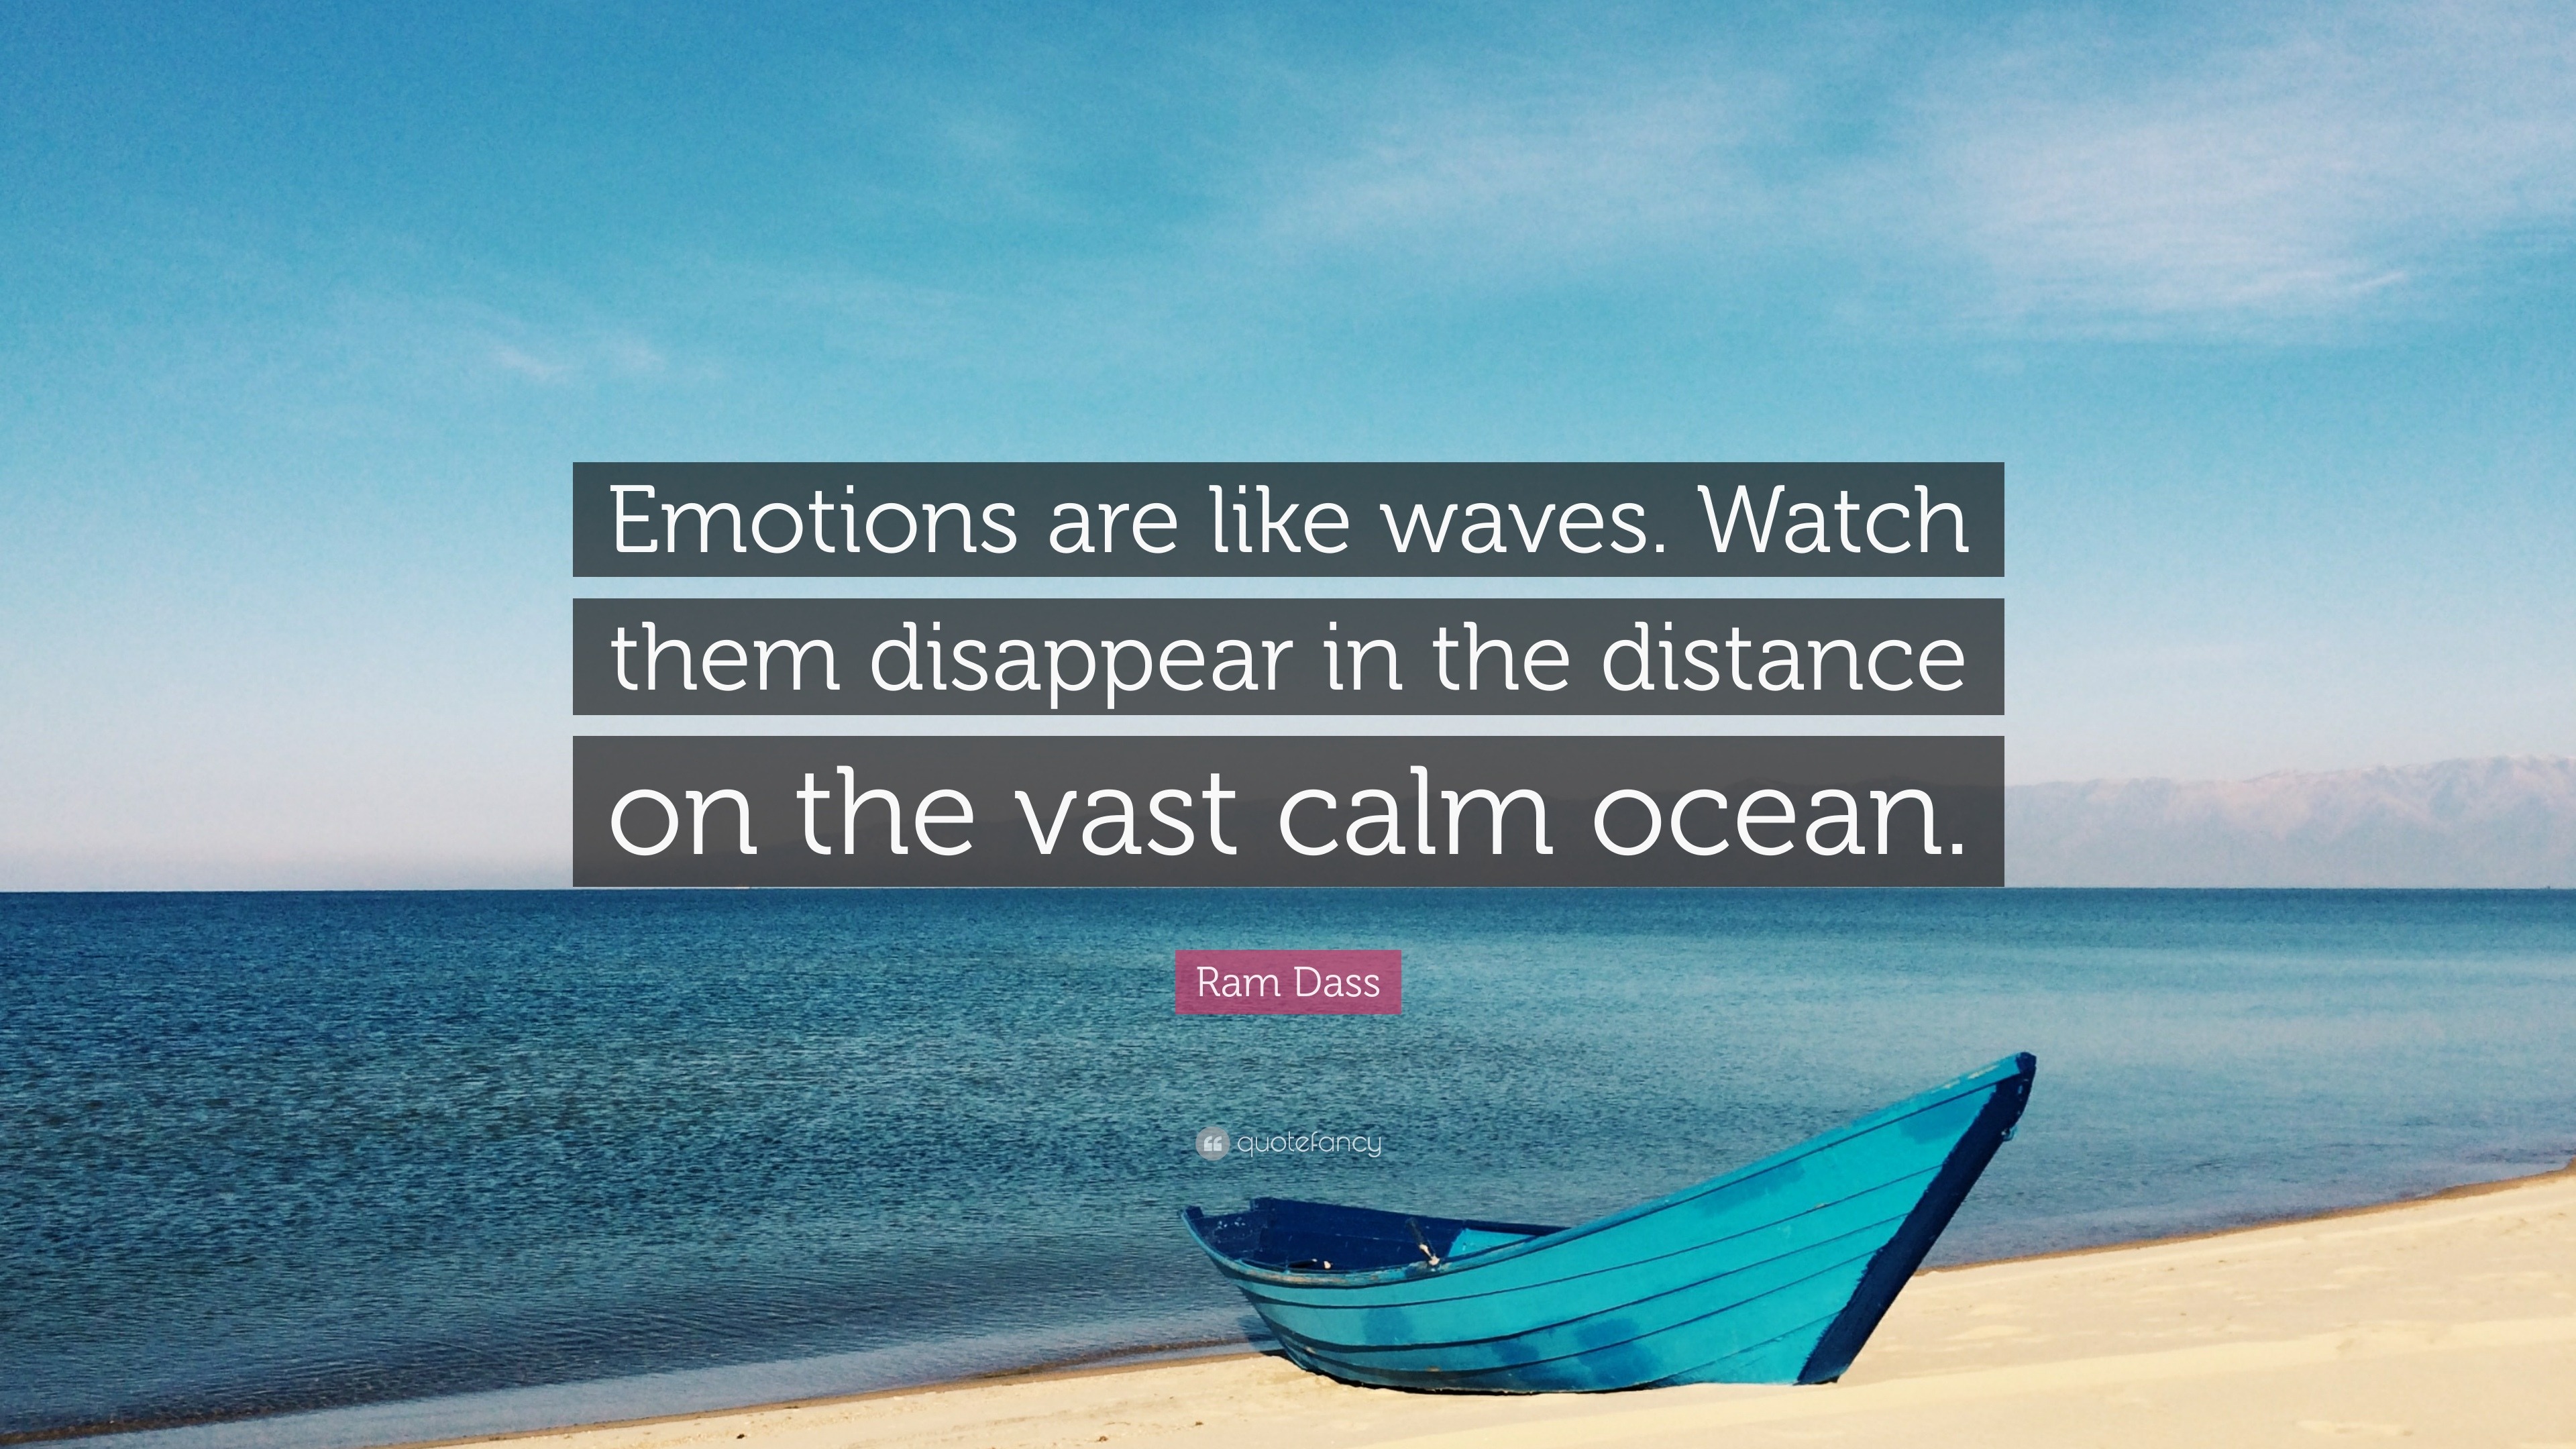 Ram Dass Quote: “Emotions are like waves. Watch them disappear in the  distance on the vast